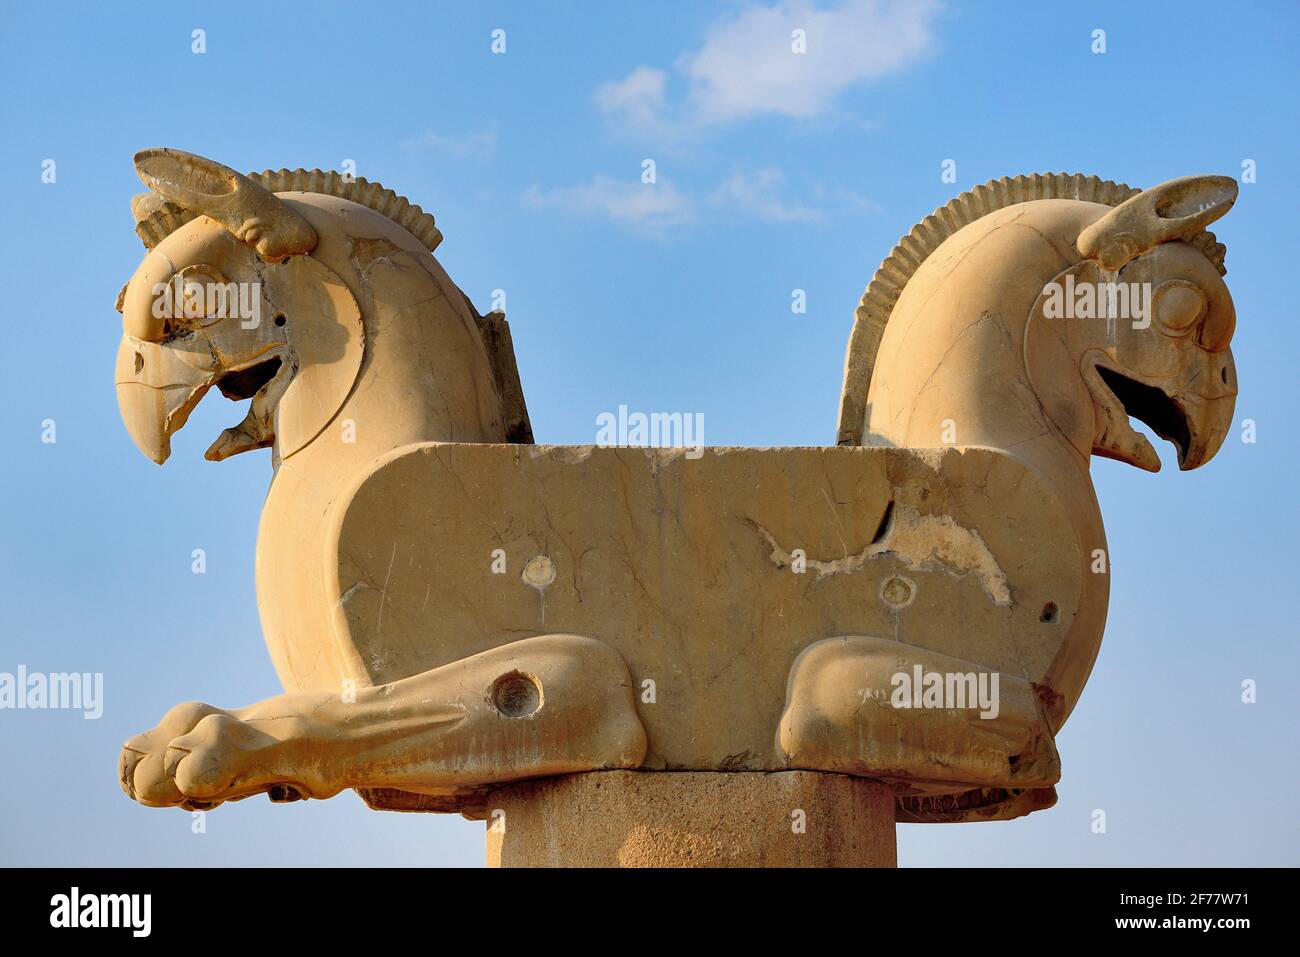 Iran, Persepolis, listed as World Heritage by UNESCO, Huma (Homa) bird column capital, (Circa 500 BC) The Huma bird is said to never come to rest, living its entire life flying invisibly high above the earth, and never alighting on the ground Stock Photo